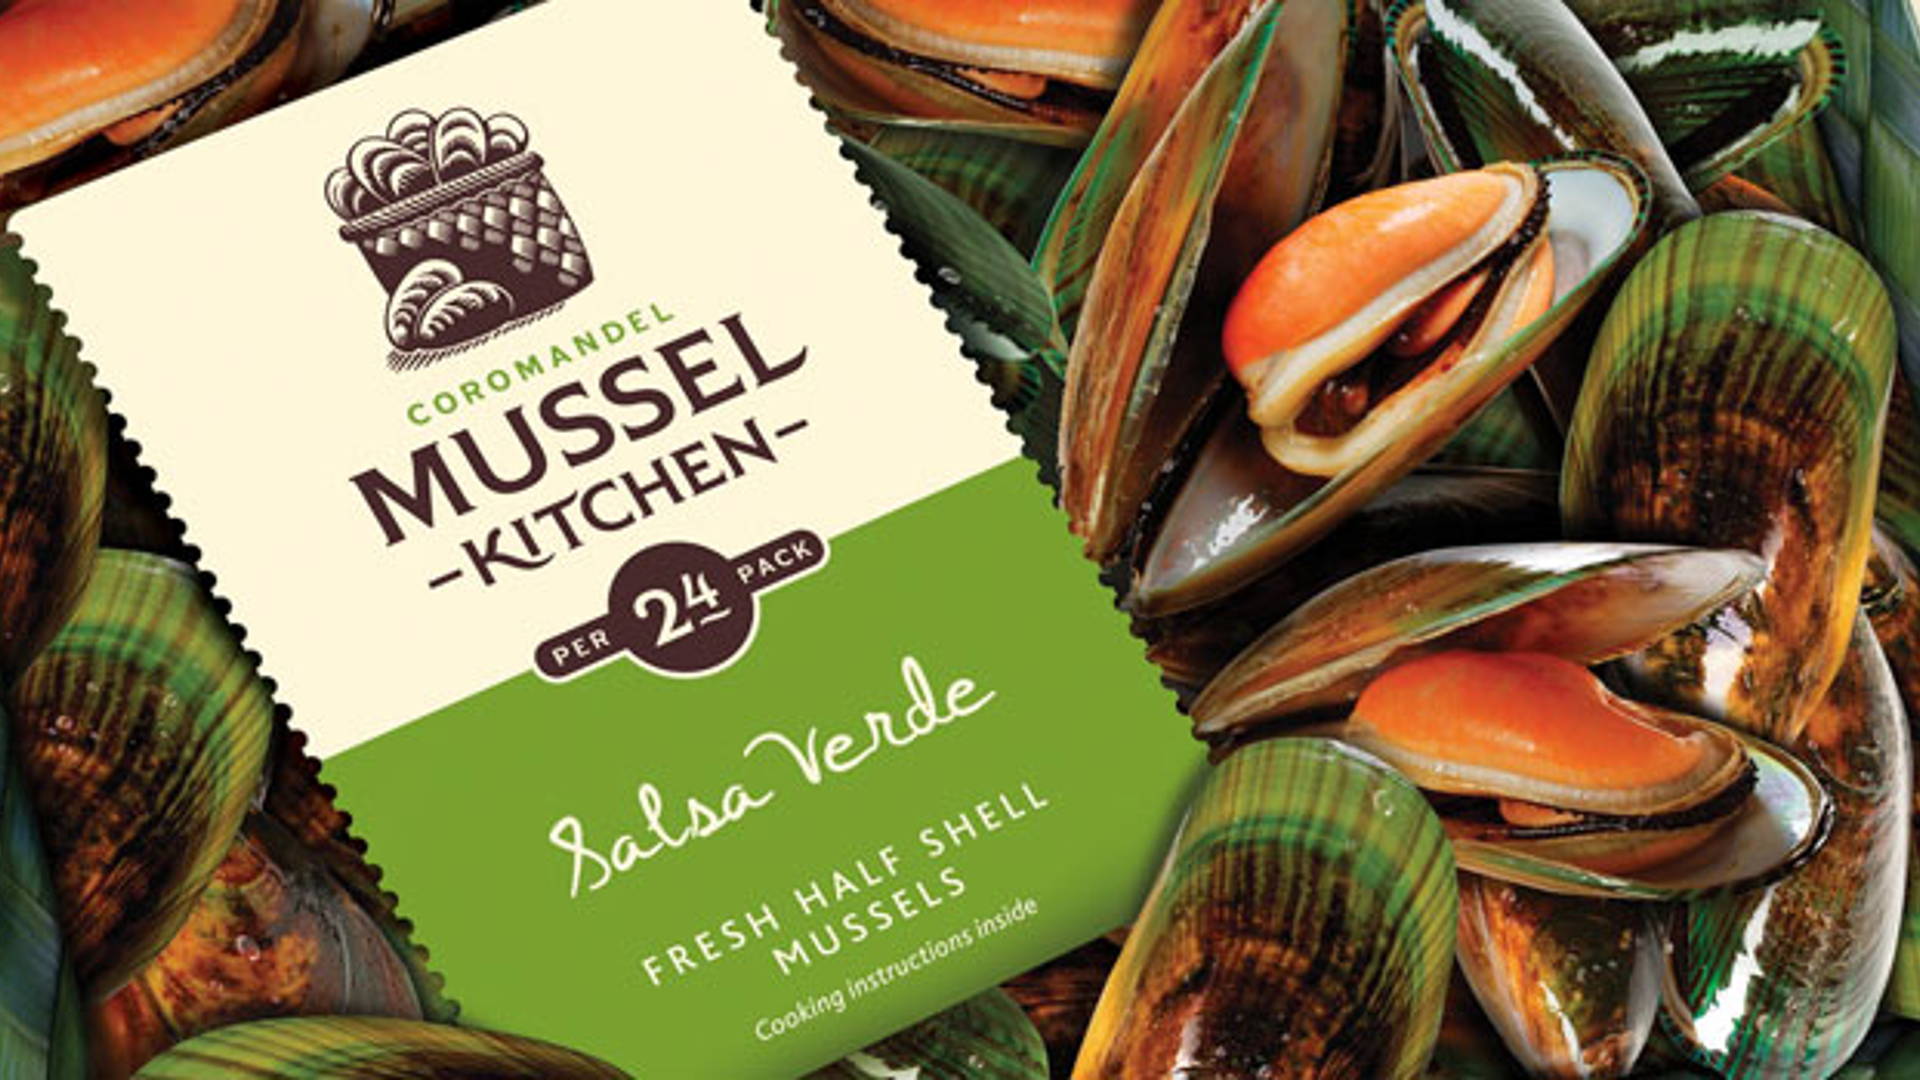 Featured image for The Coromandel Mussel Kitchen